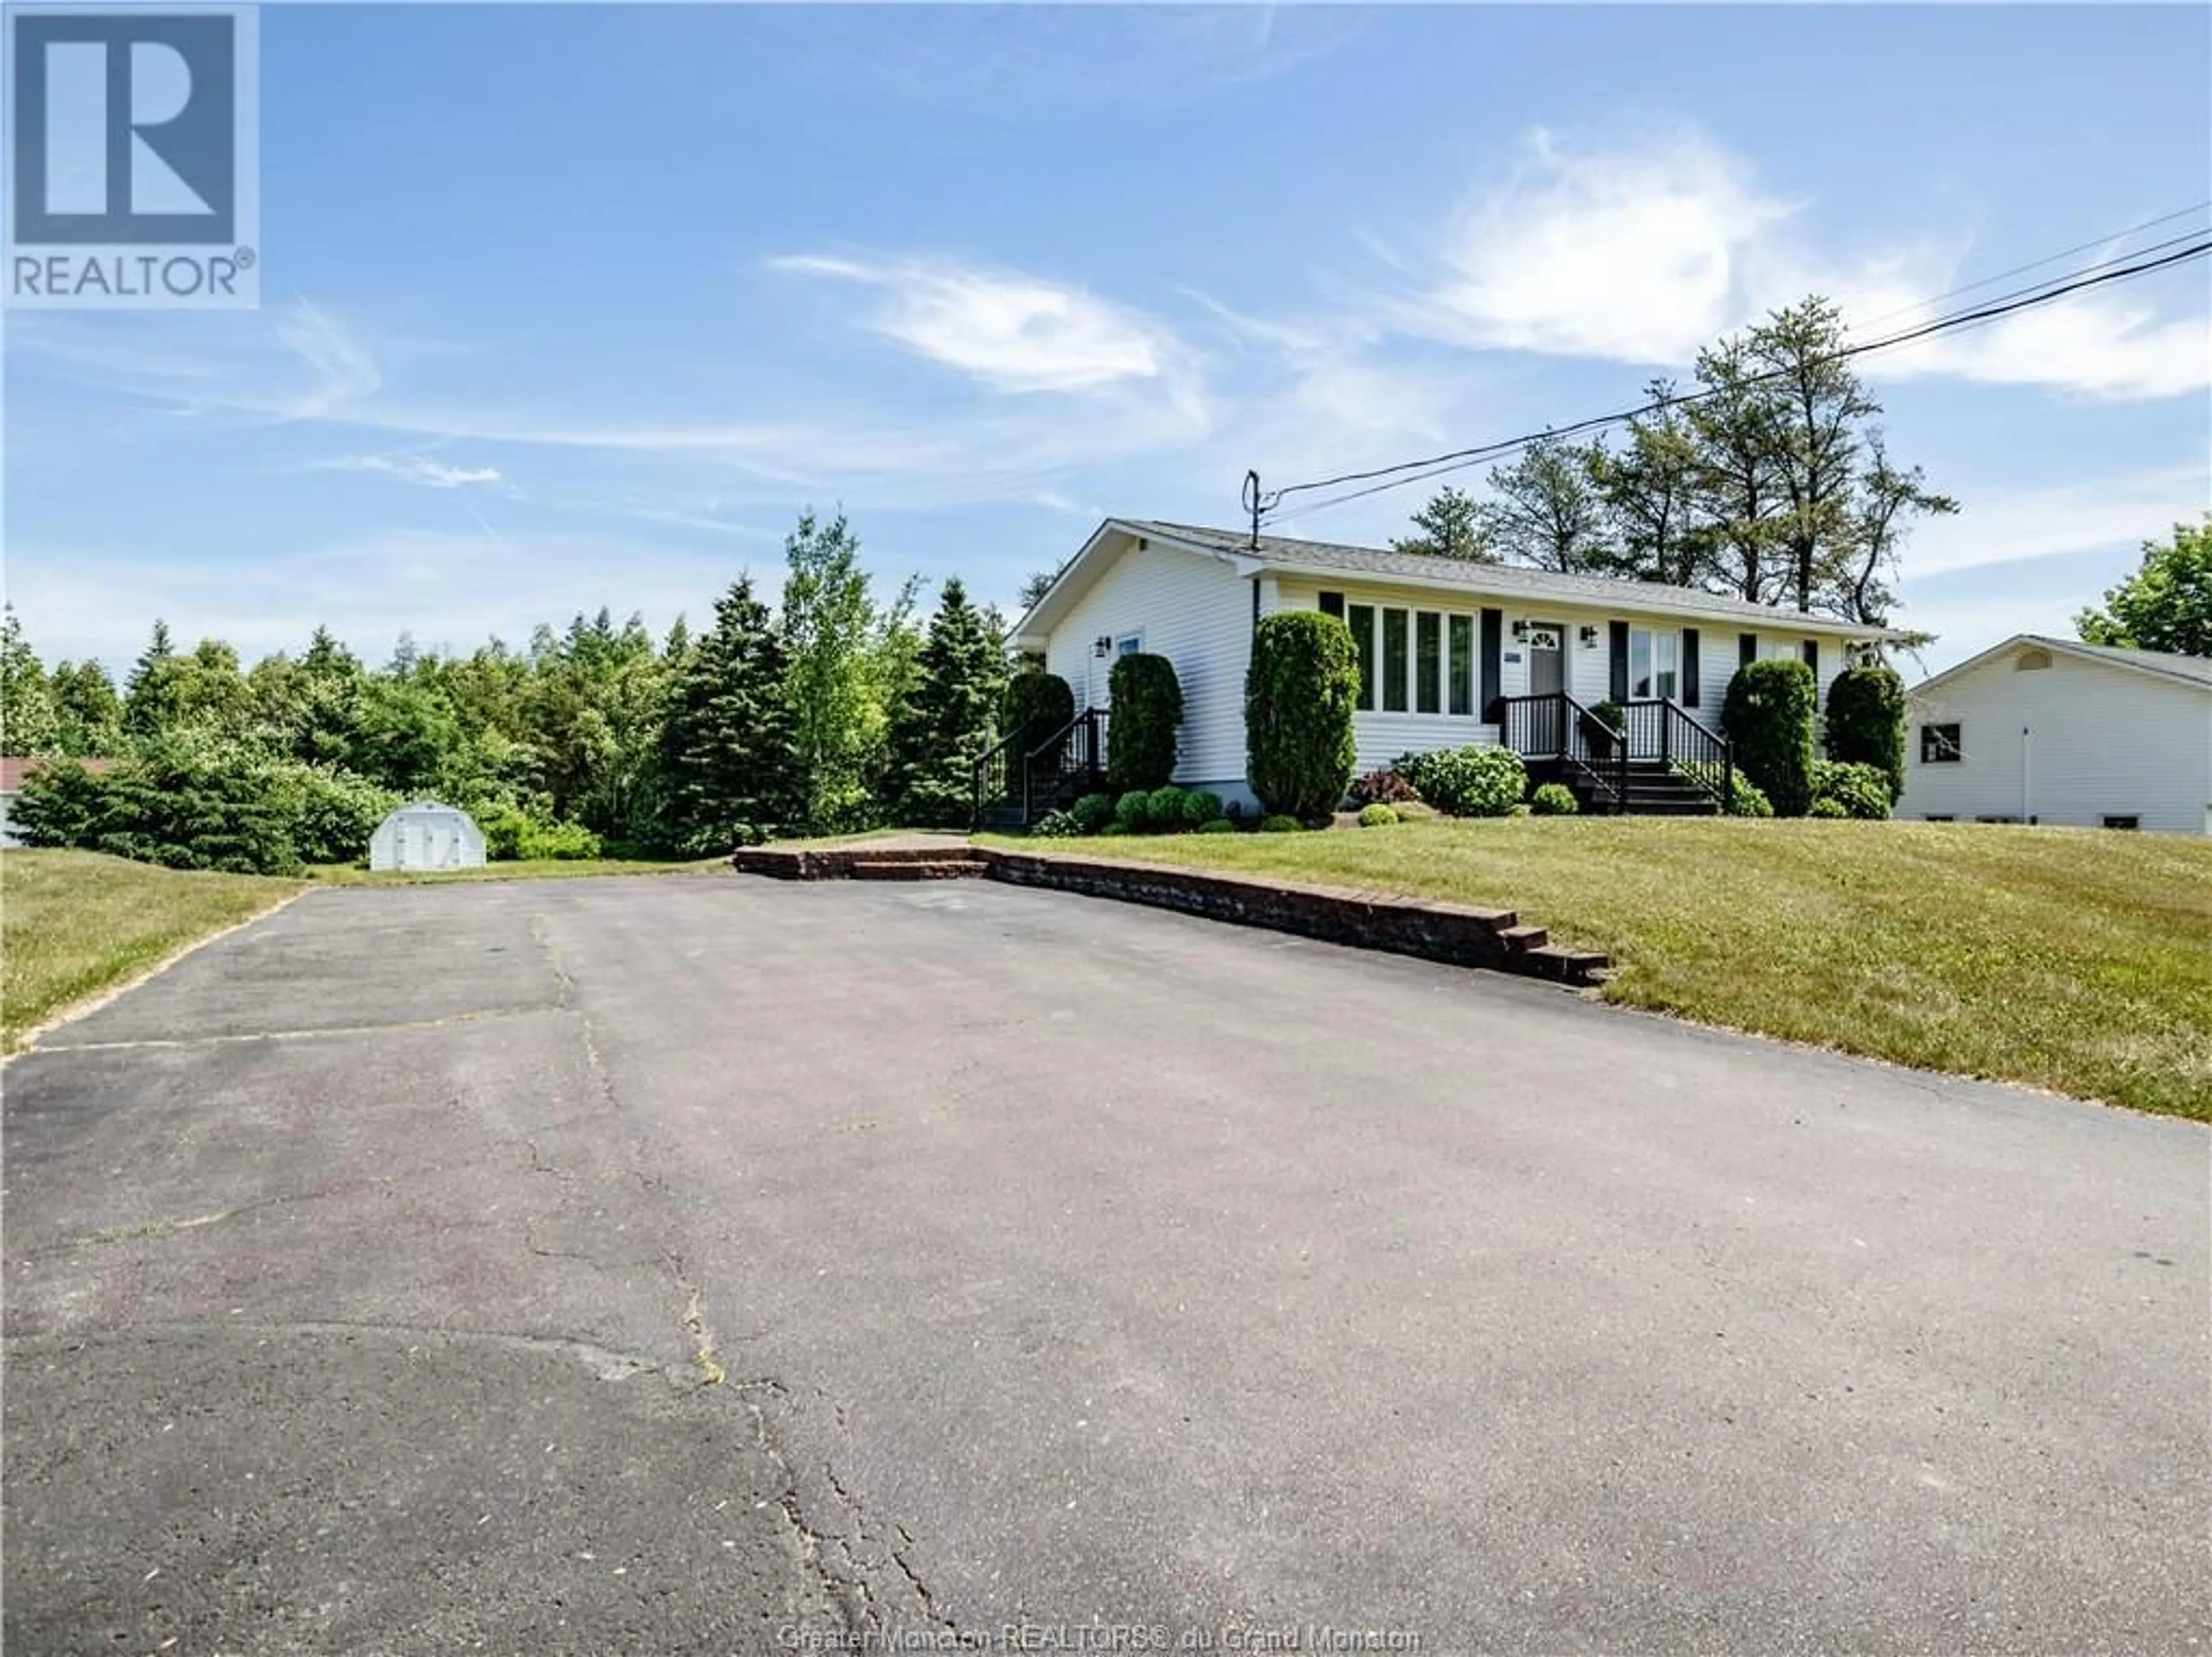 Frontside or backside of a home for 9531 Main ST, Richibucto New Brunswick E4W4C2